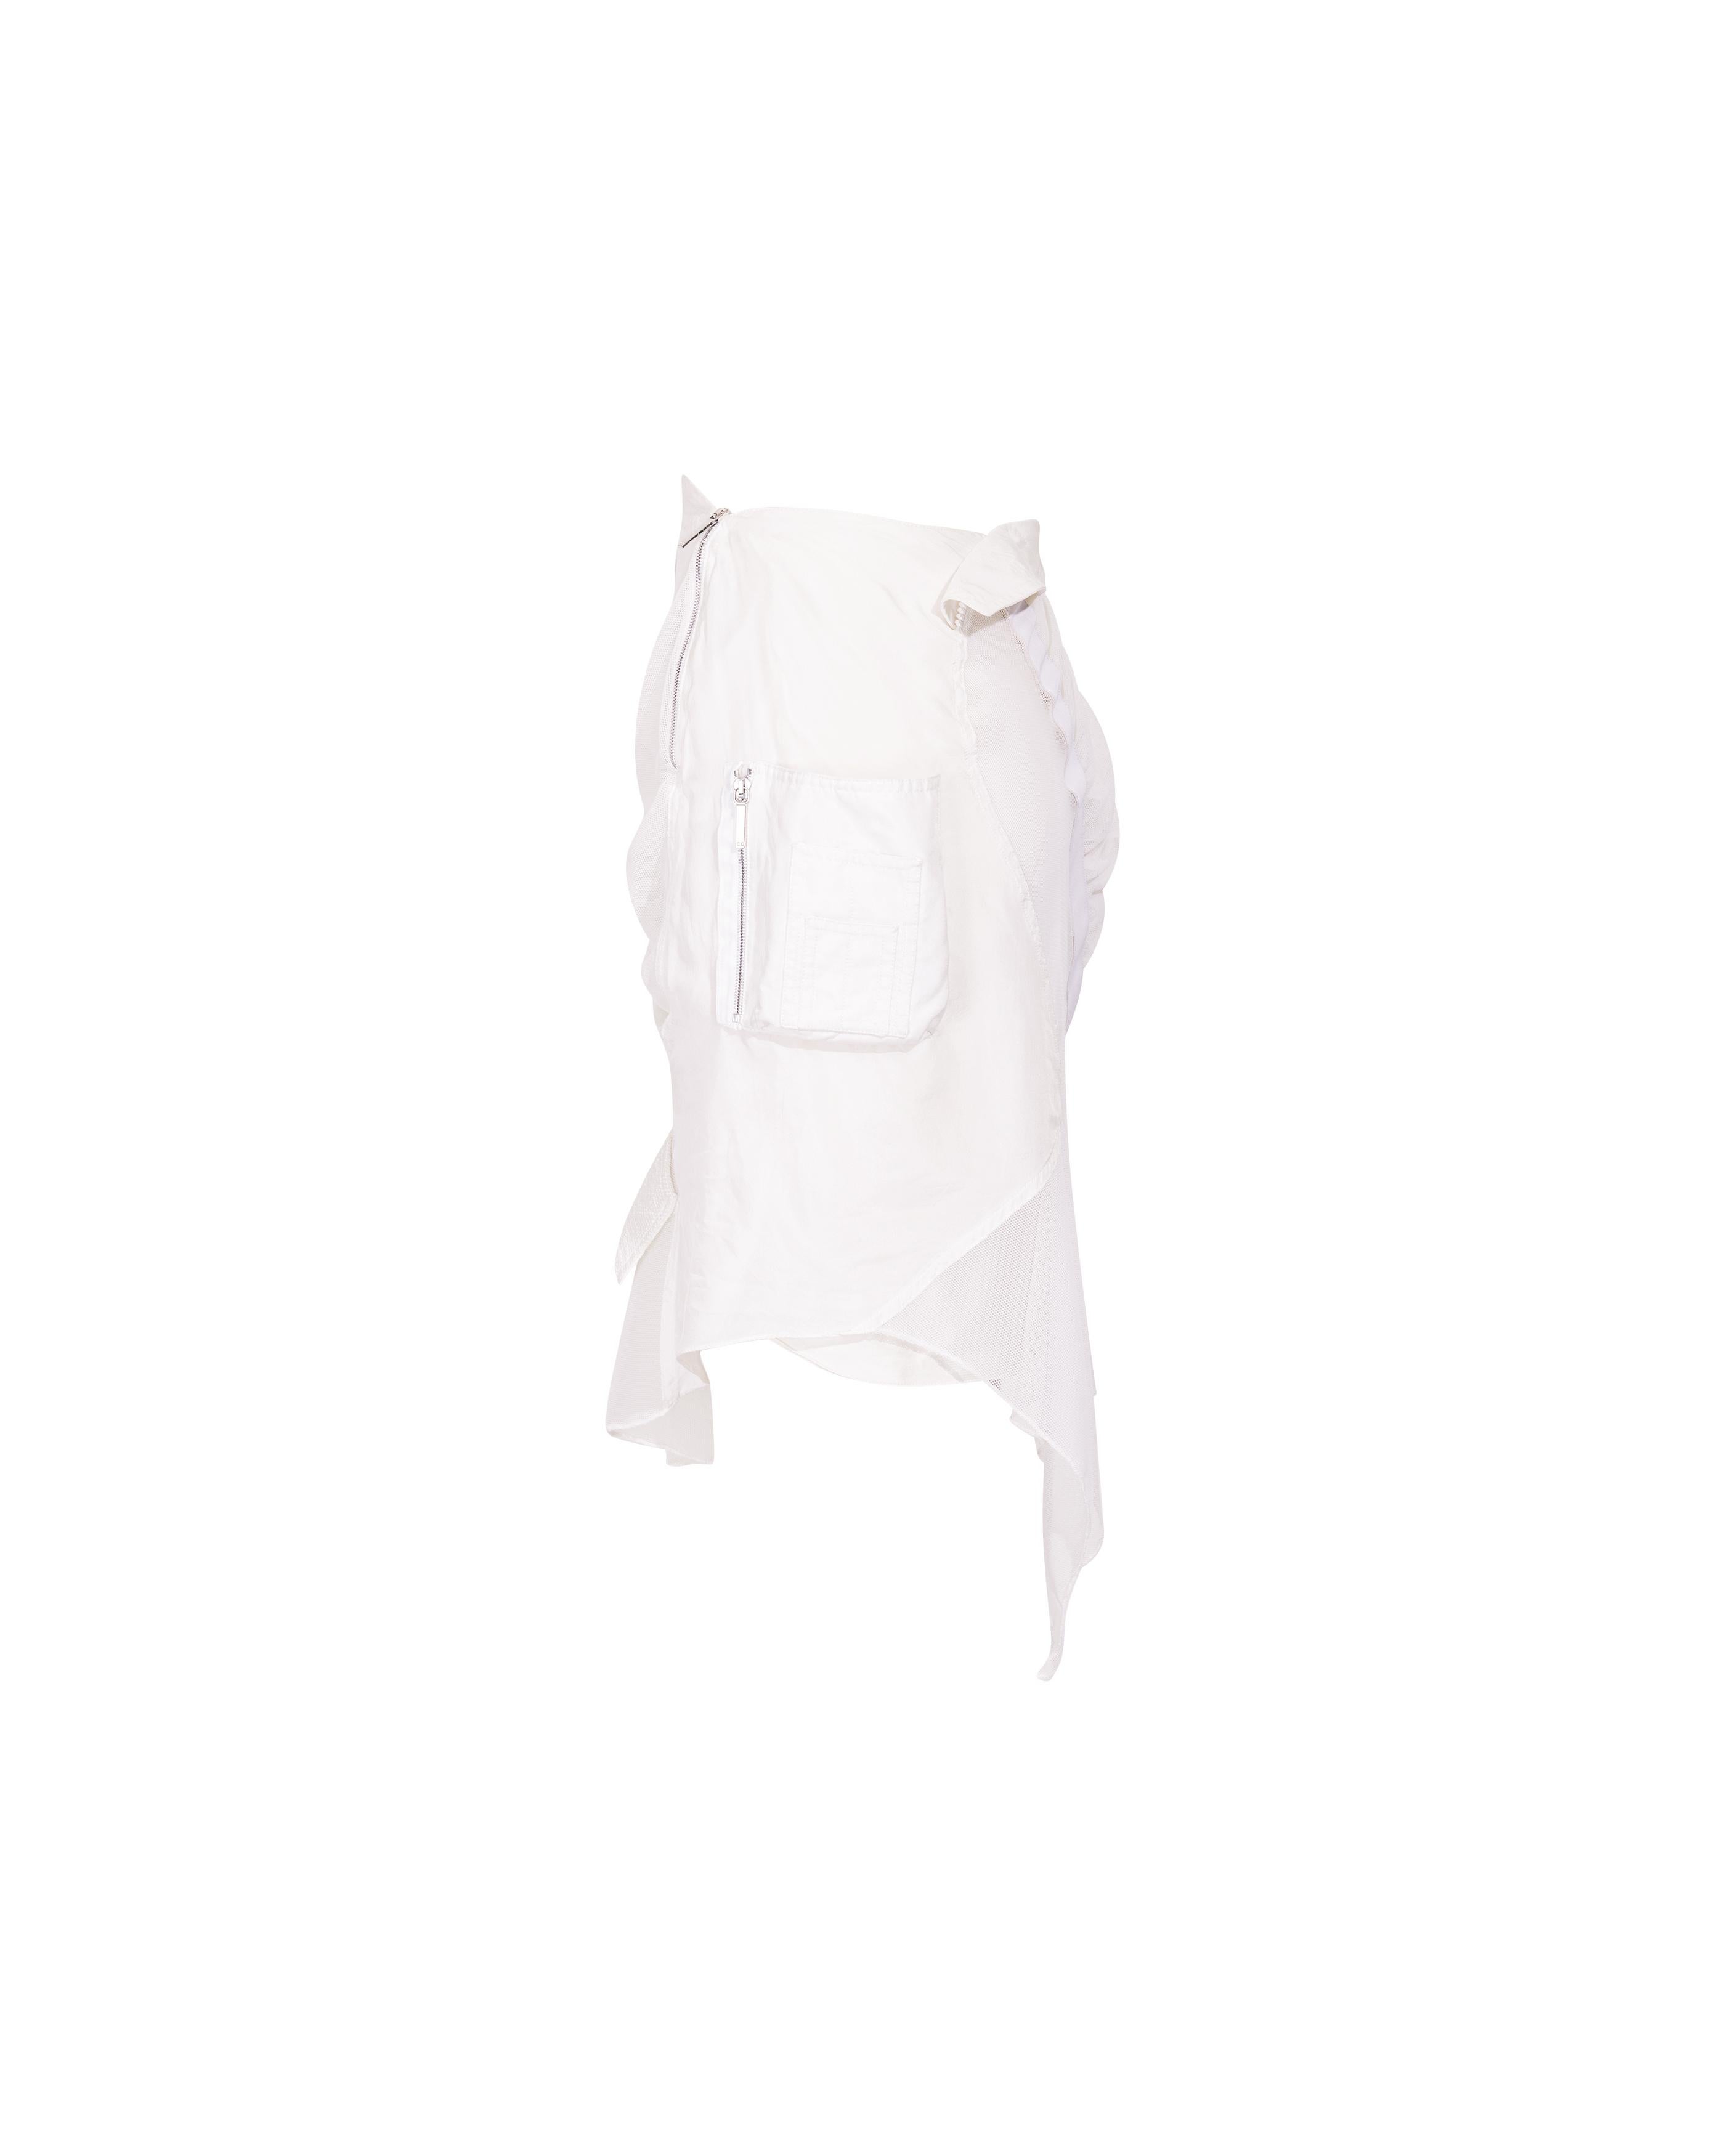 S/S 2002 Christian Dior by John Galliano White Asymmetrical Deconstructed Skirt In Good Condition In North Hollywood, CA